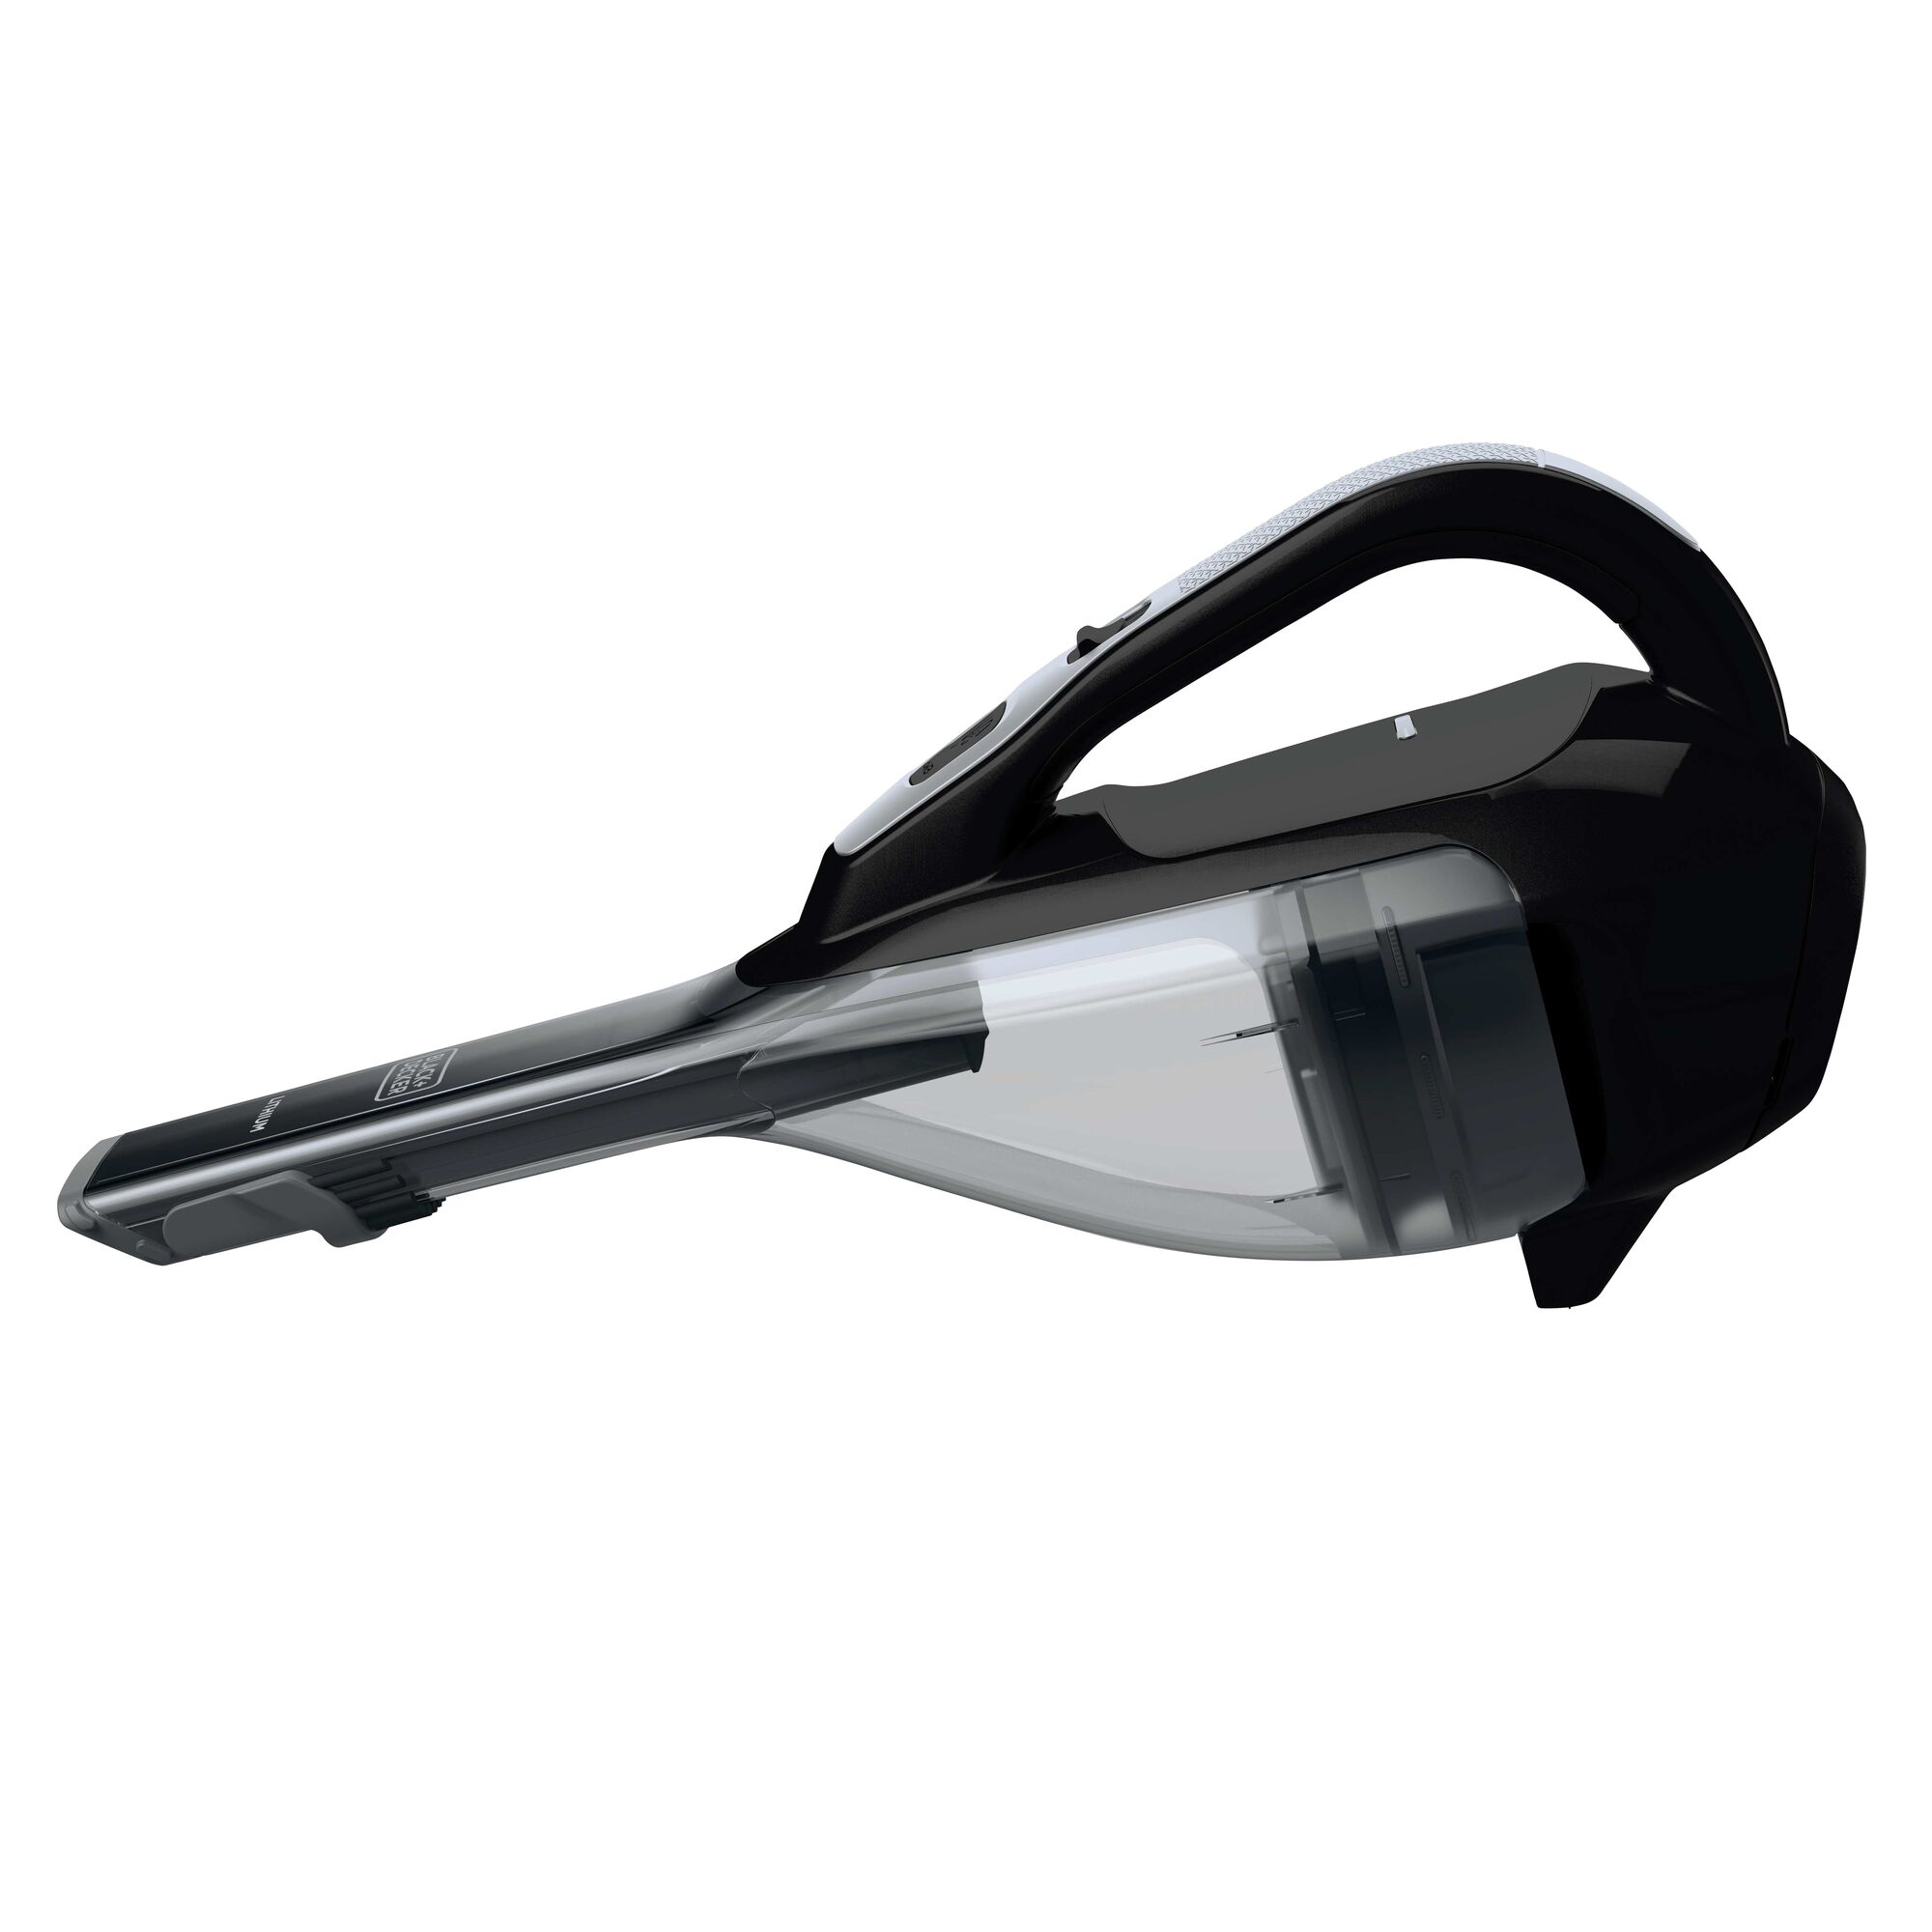 Profile of dustbuster Advanced Clean cordless hand vacuum.